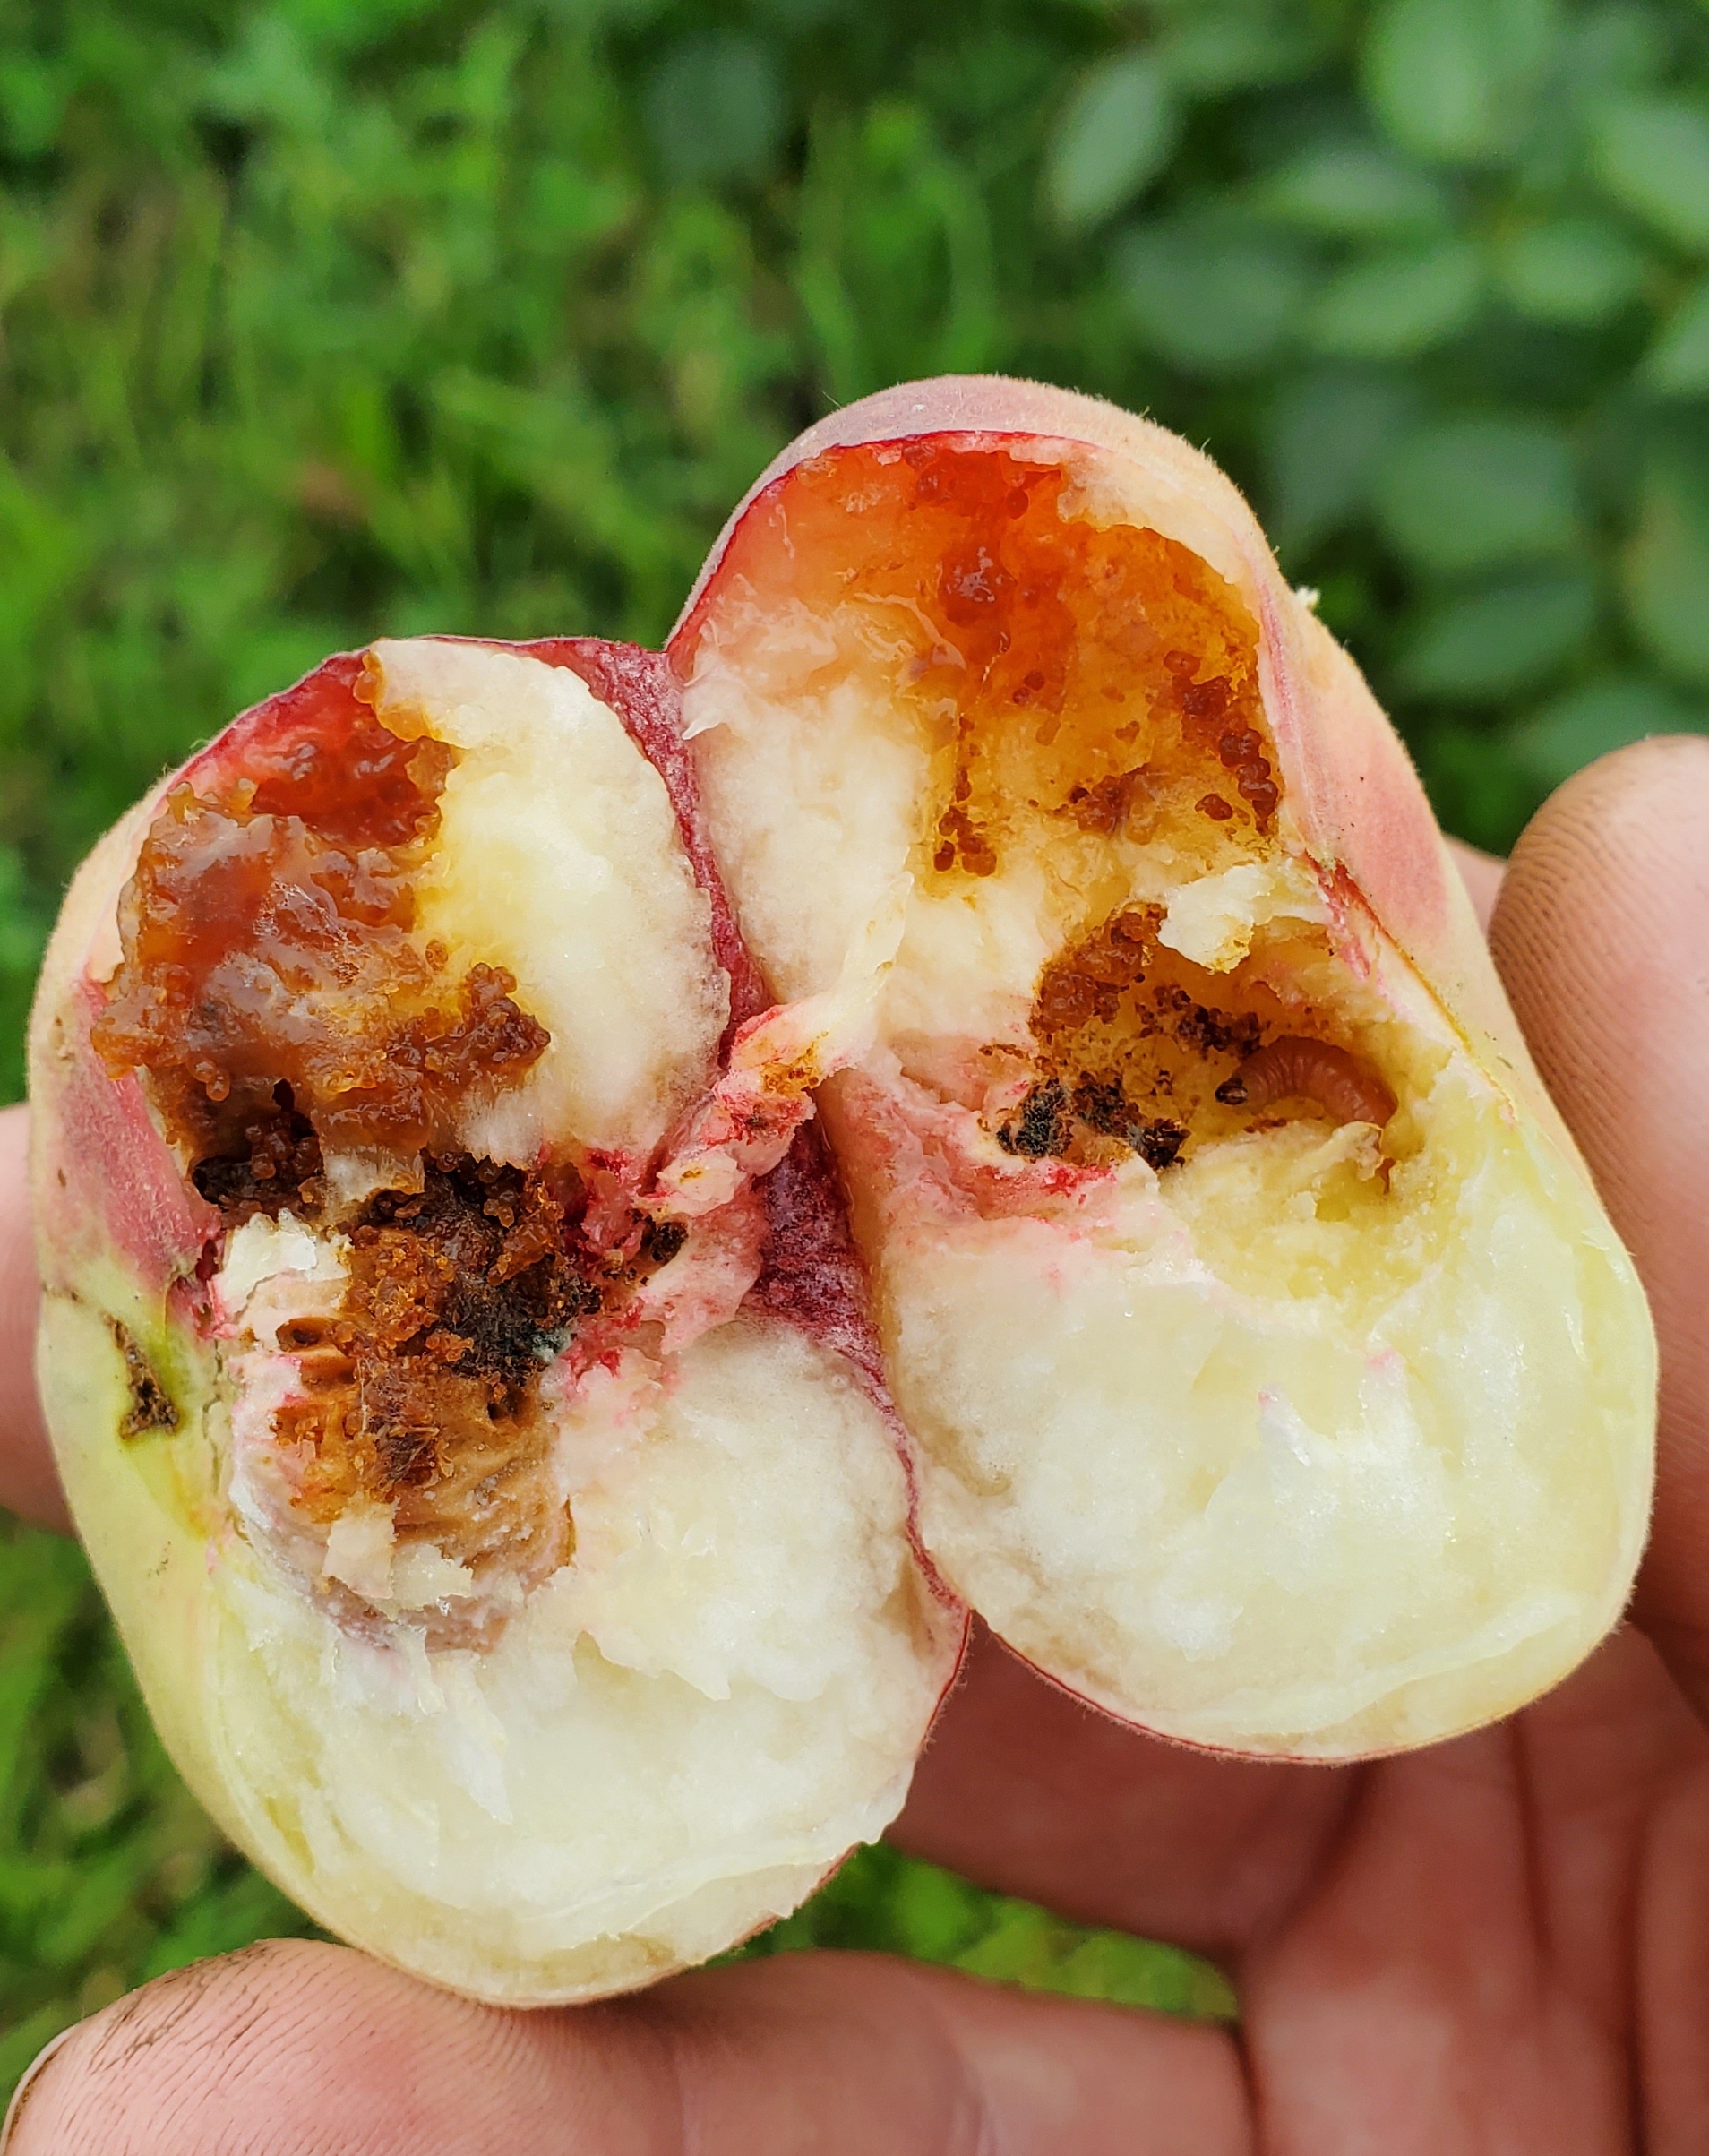 The inside of a peach with fruit damage.